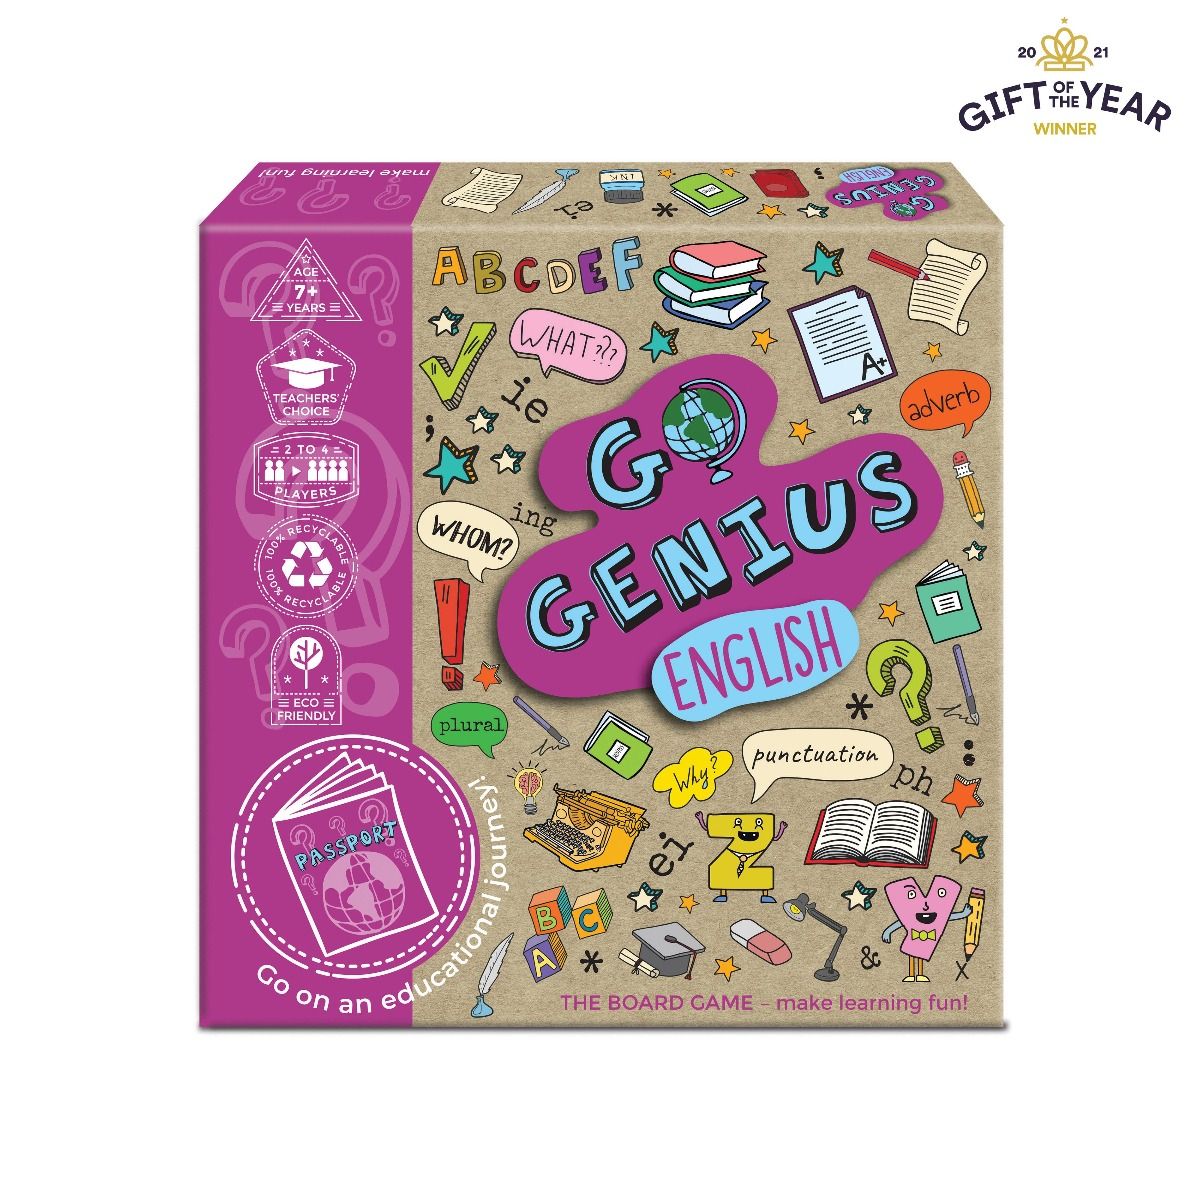 Go Genius English - The Board Game - Gifts R Us